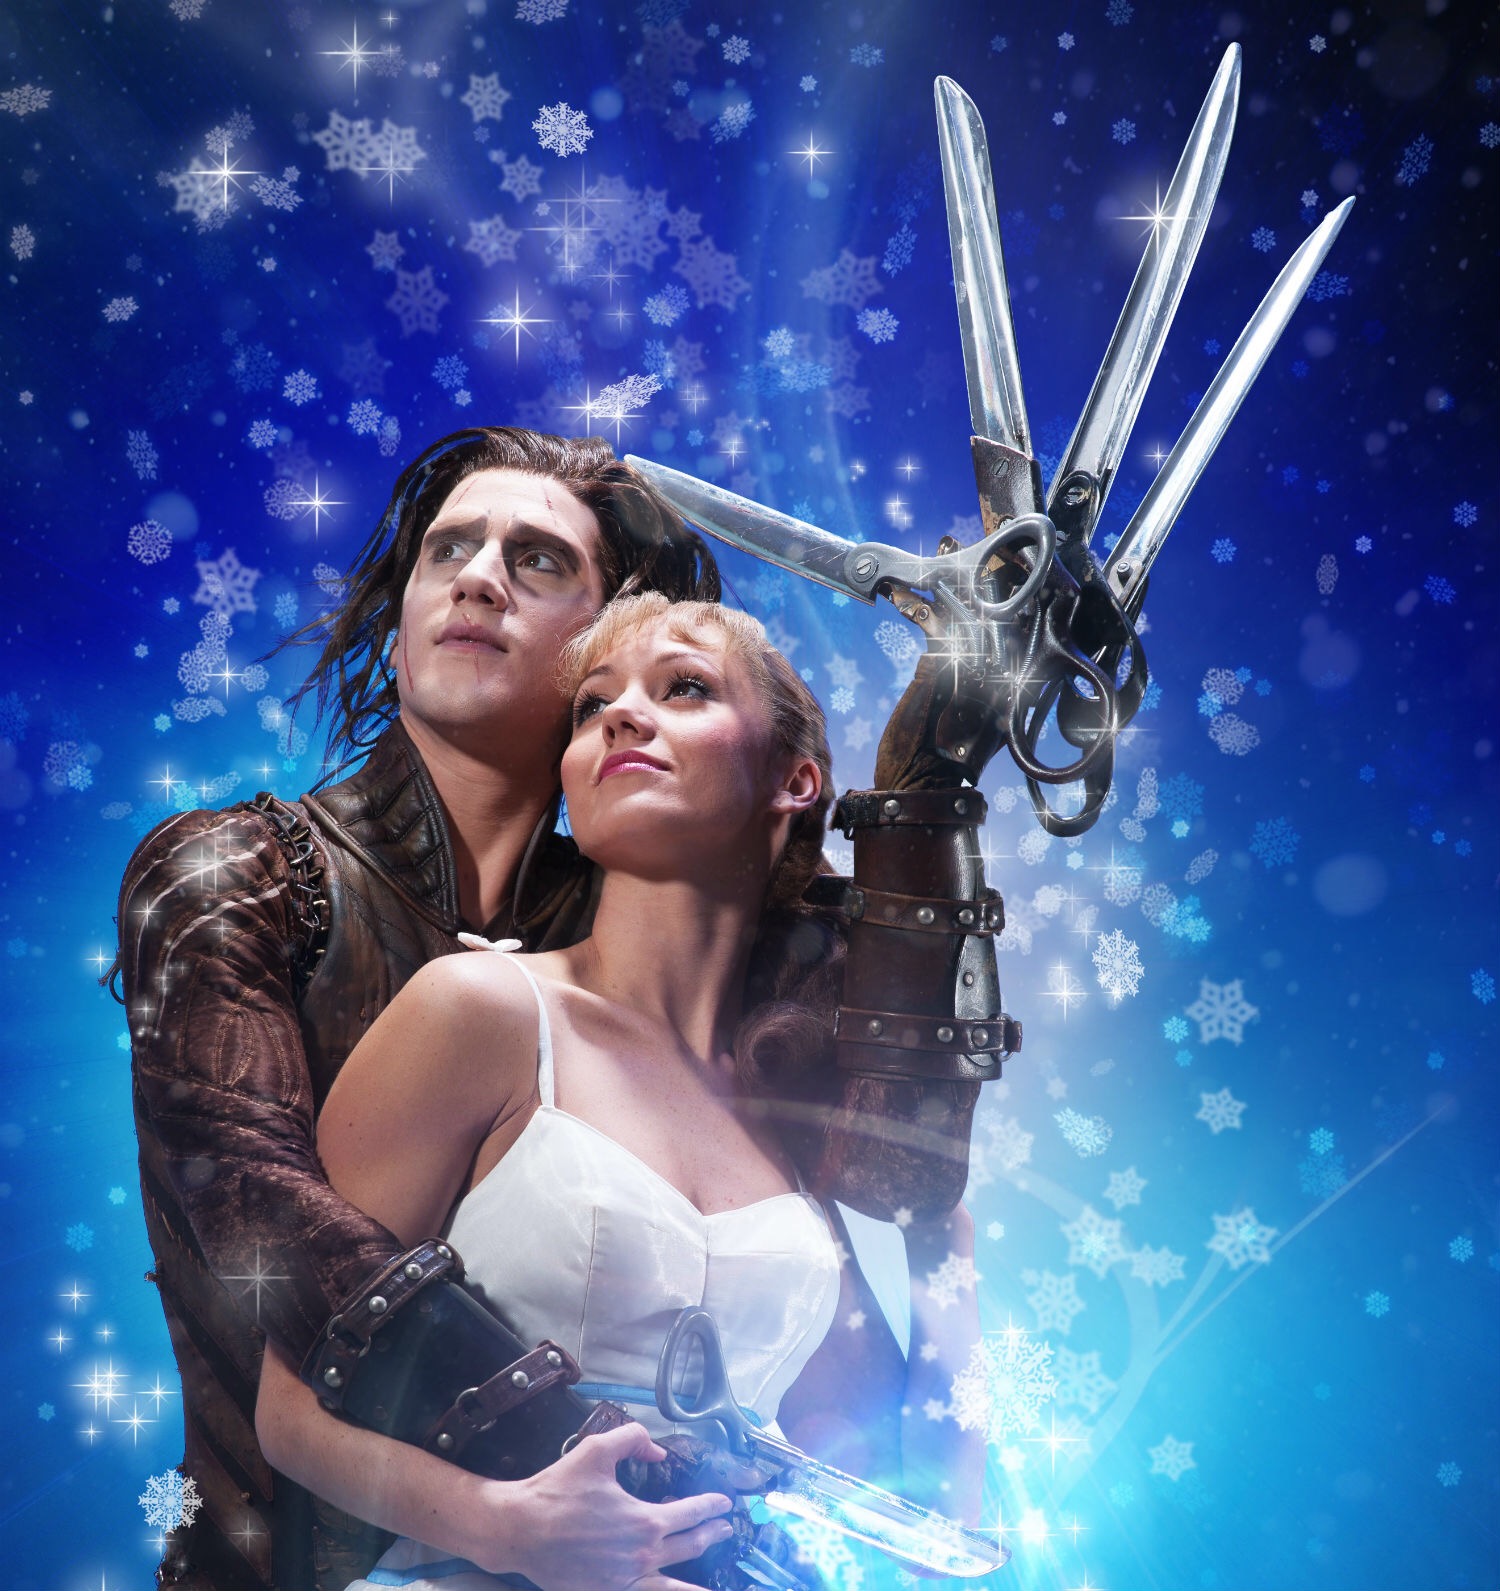 Matthew Bourne's Edward Scissorhands comes to The Lowry About Manchester